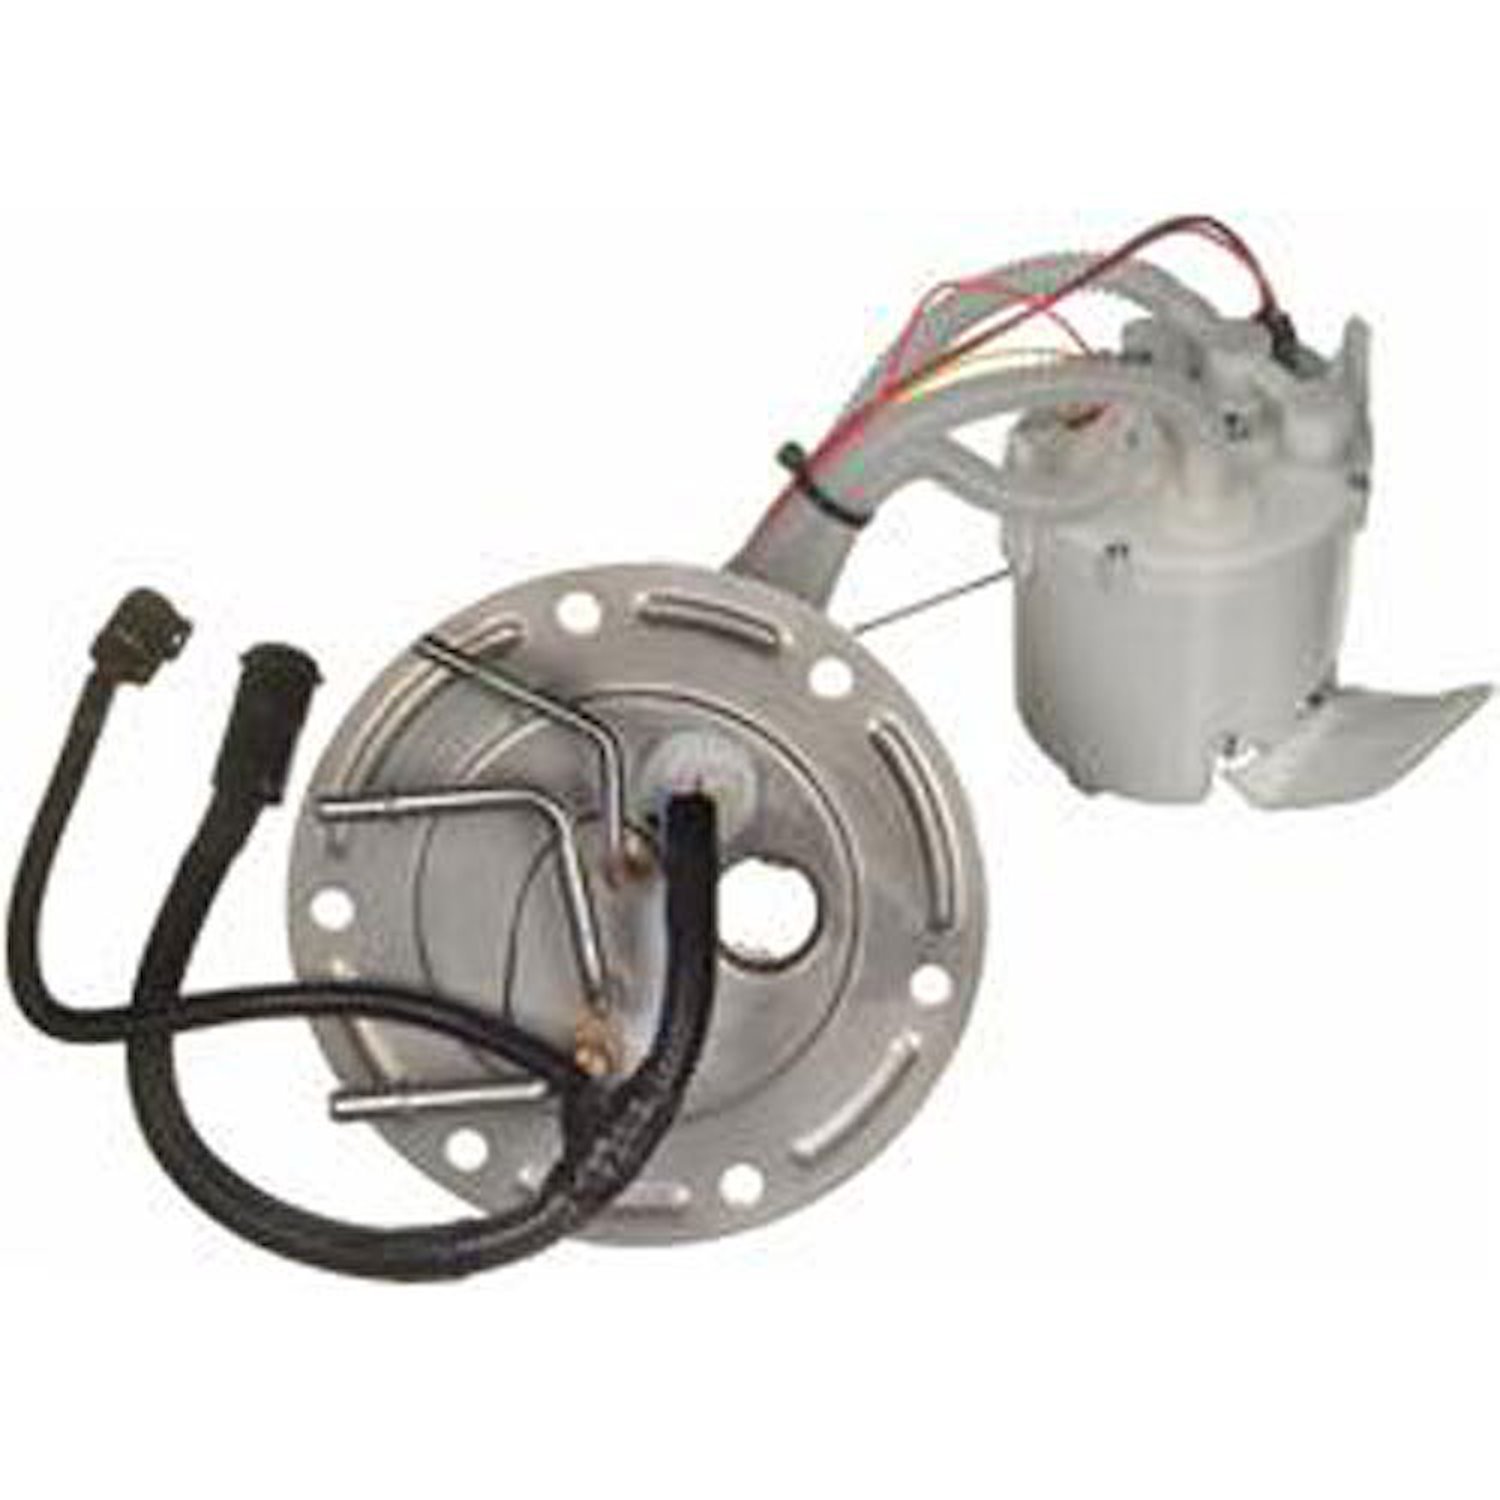 OE Ford Replacement Electric Fuel Pump Module Assembly 1999 Ford F350/F450/F550 Super Duty 5.4L/6.8L V8